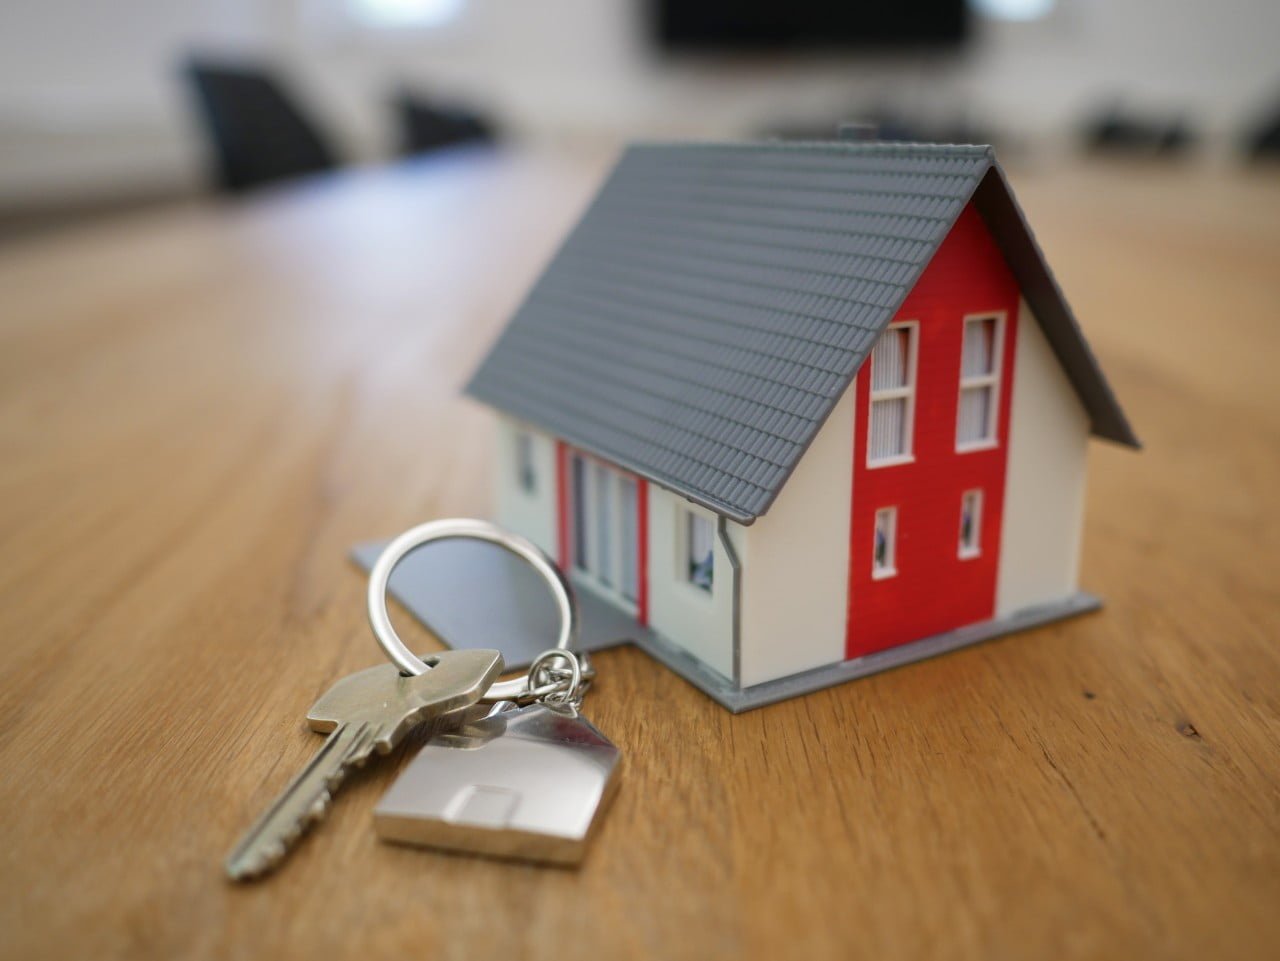 photo of toy house and set of keys to illustrate mortgage rating and credit score